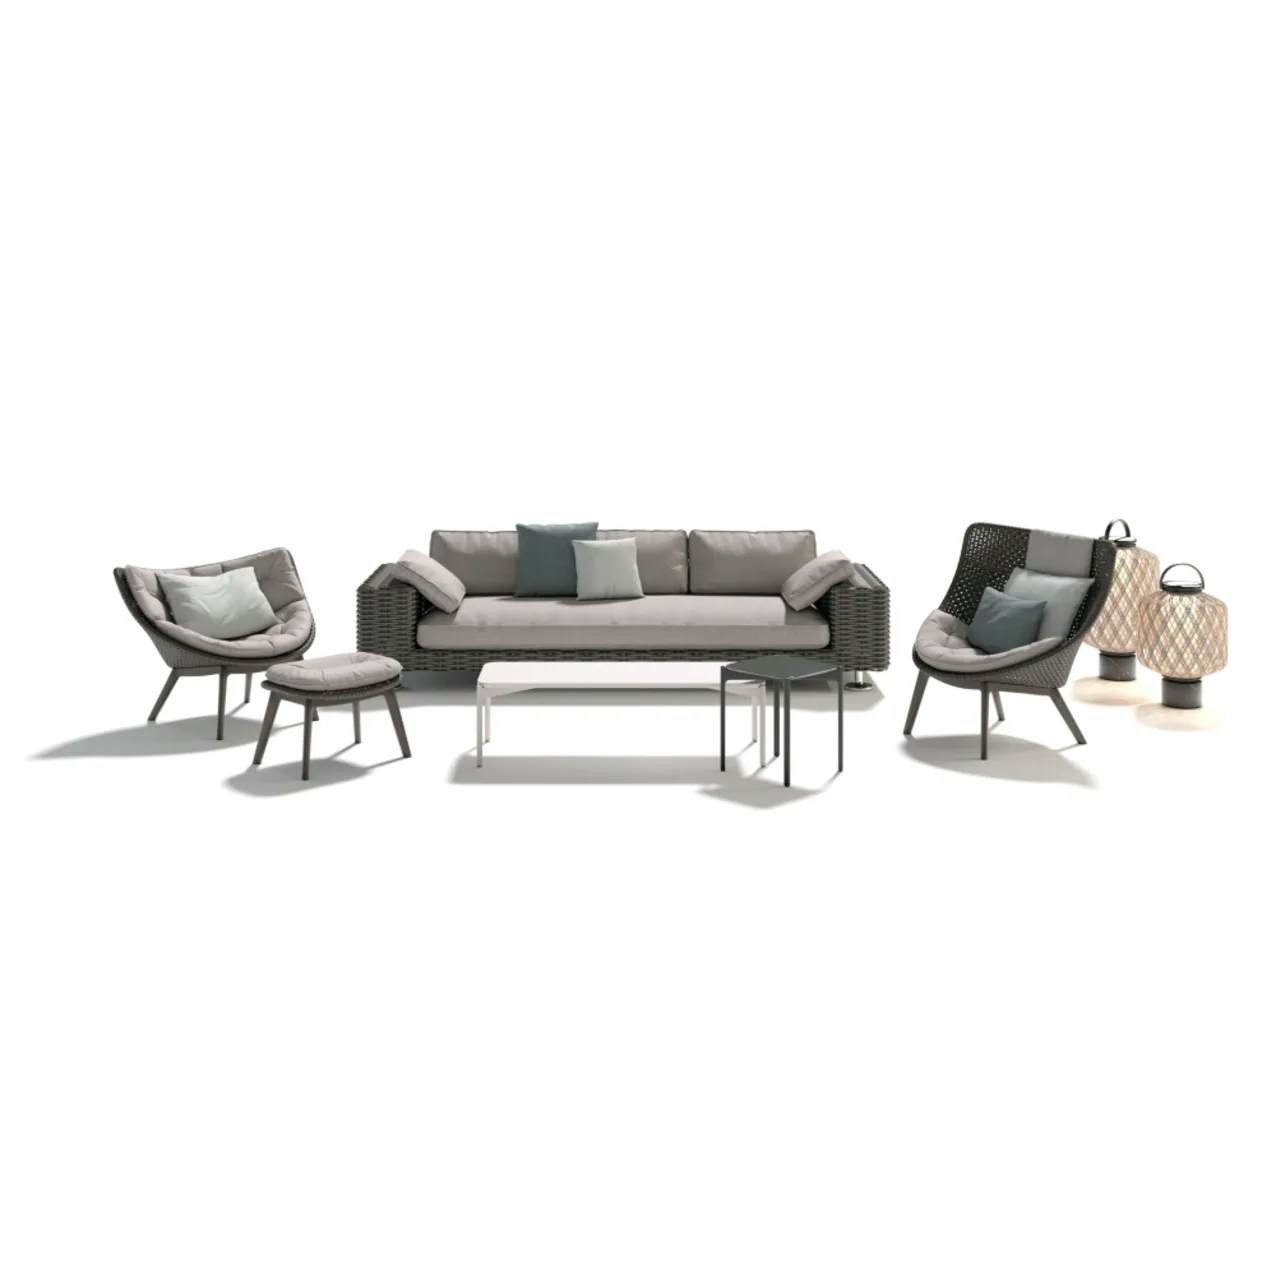 DEDON MBRACE Club Chair & Ottoman | PAROS 3-Seater Sofa | IZON Coffee Tables | MBRACE Wing Chair | THE OTHERS Lanterns